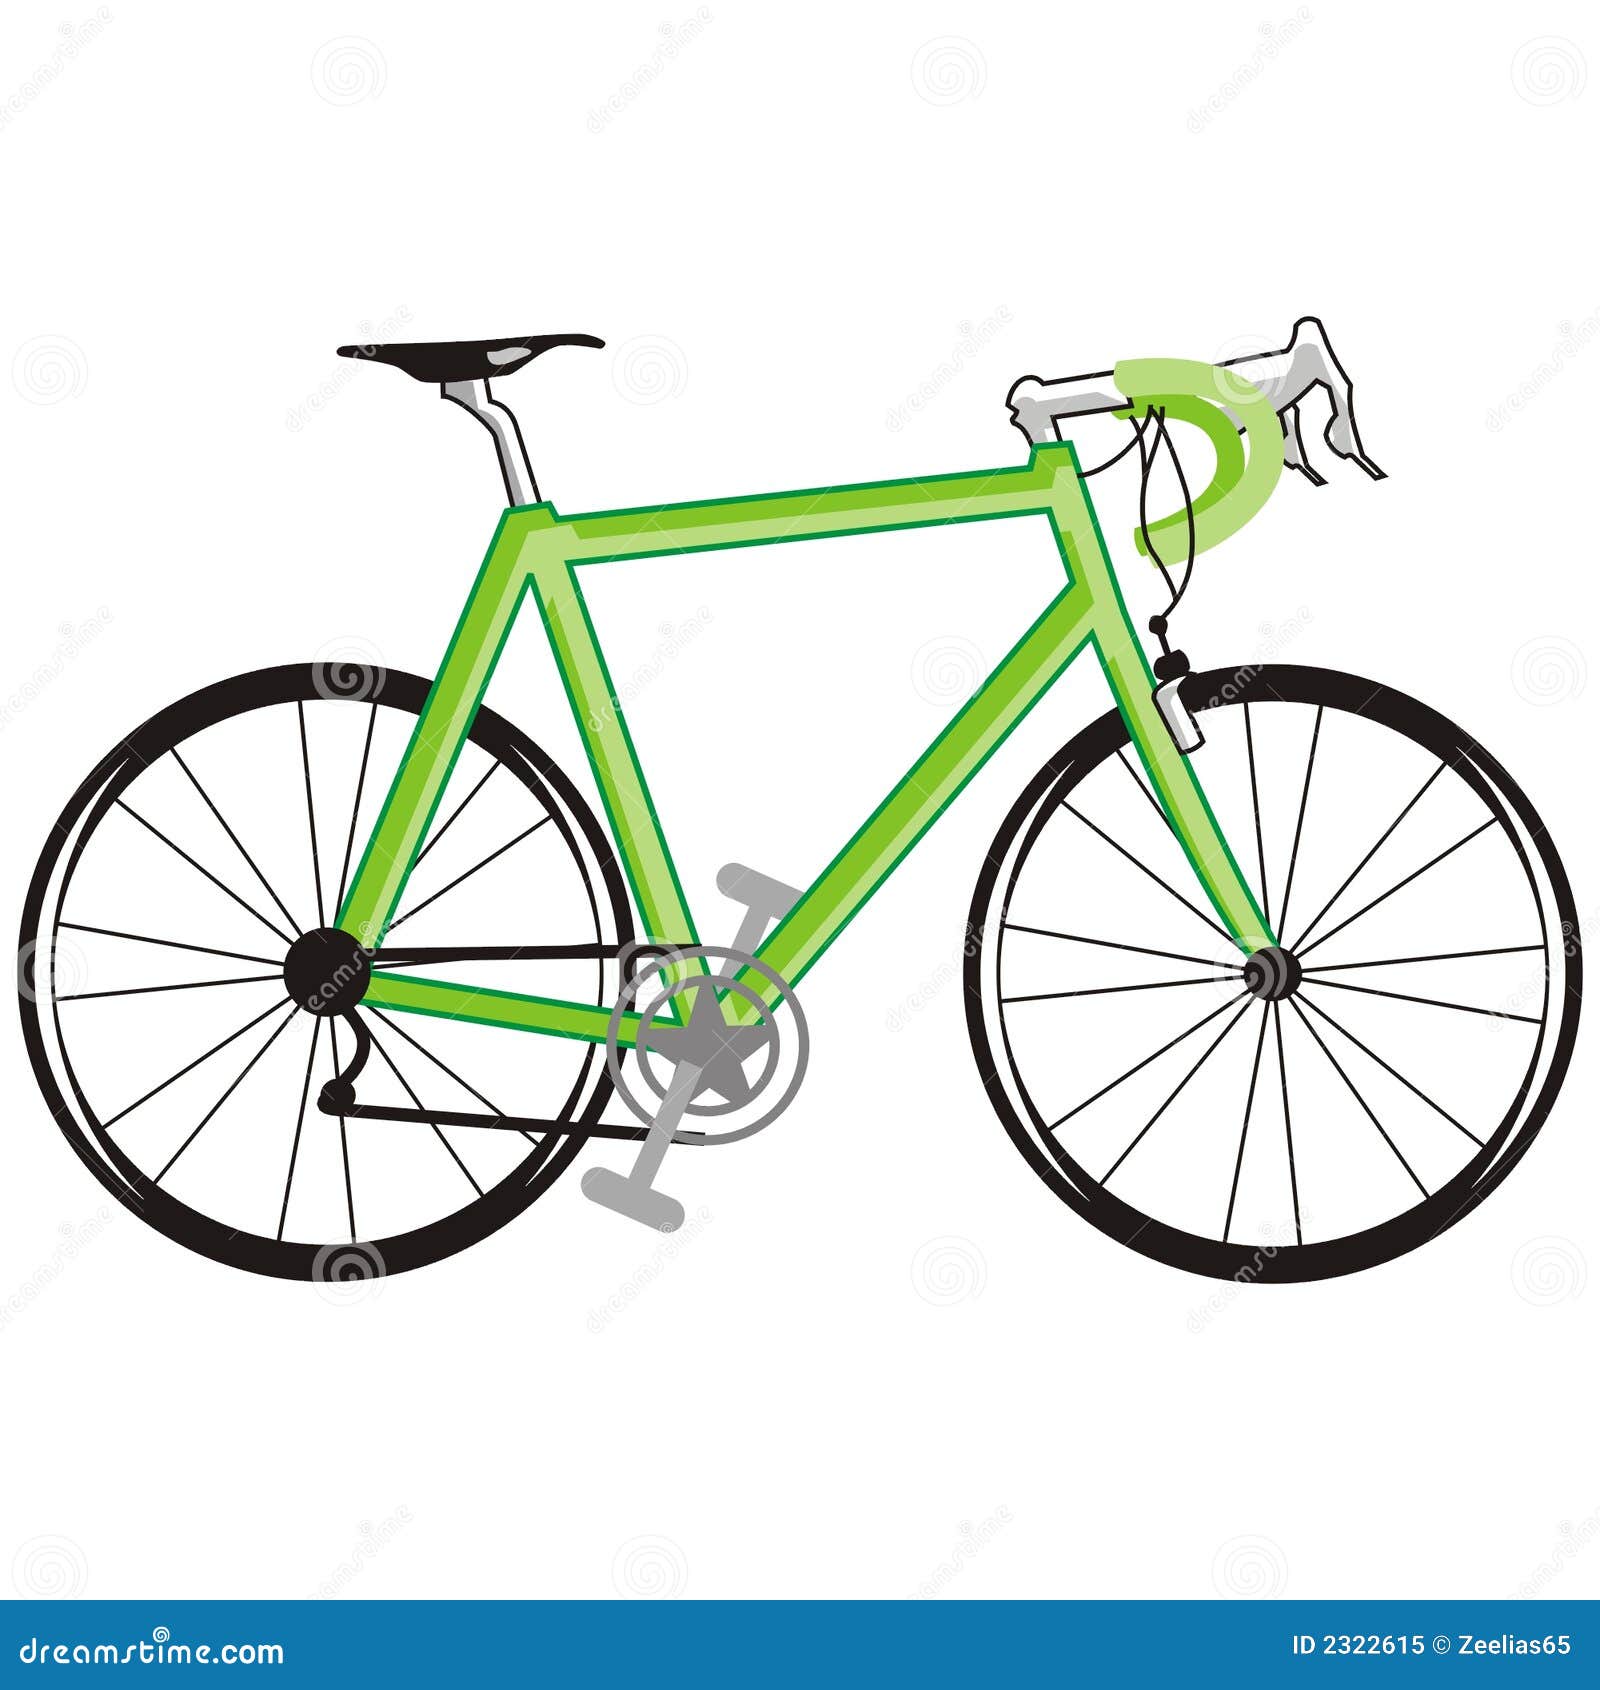 Green bicycle stock vector. Illustration of sport, logo - 2322615